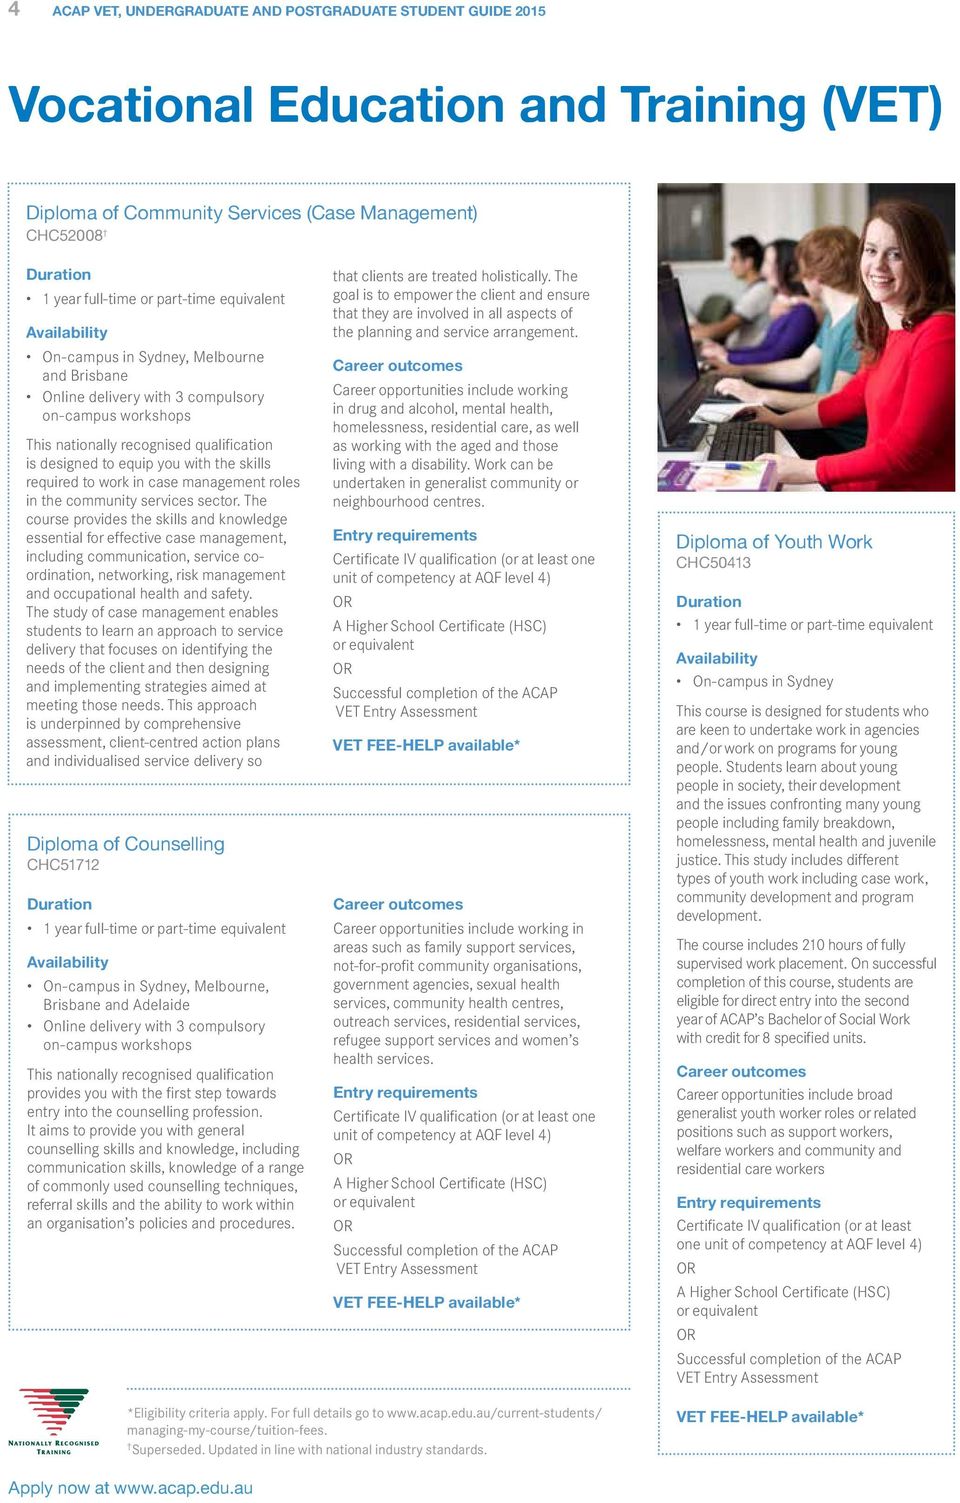 case management roles in the community services sector.